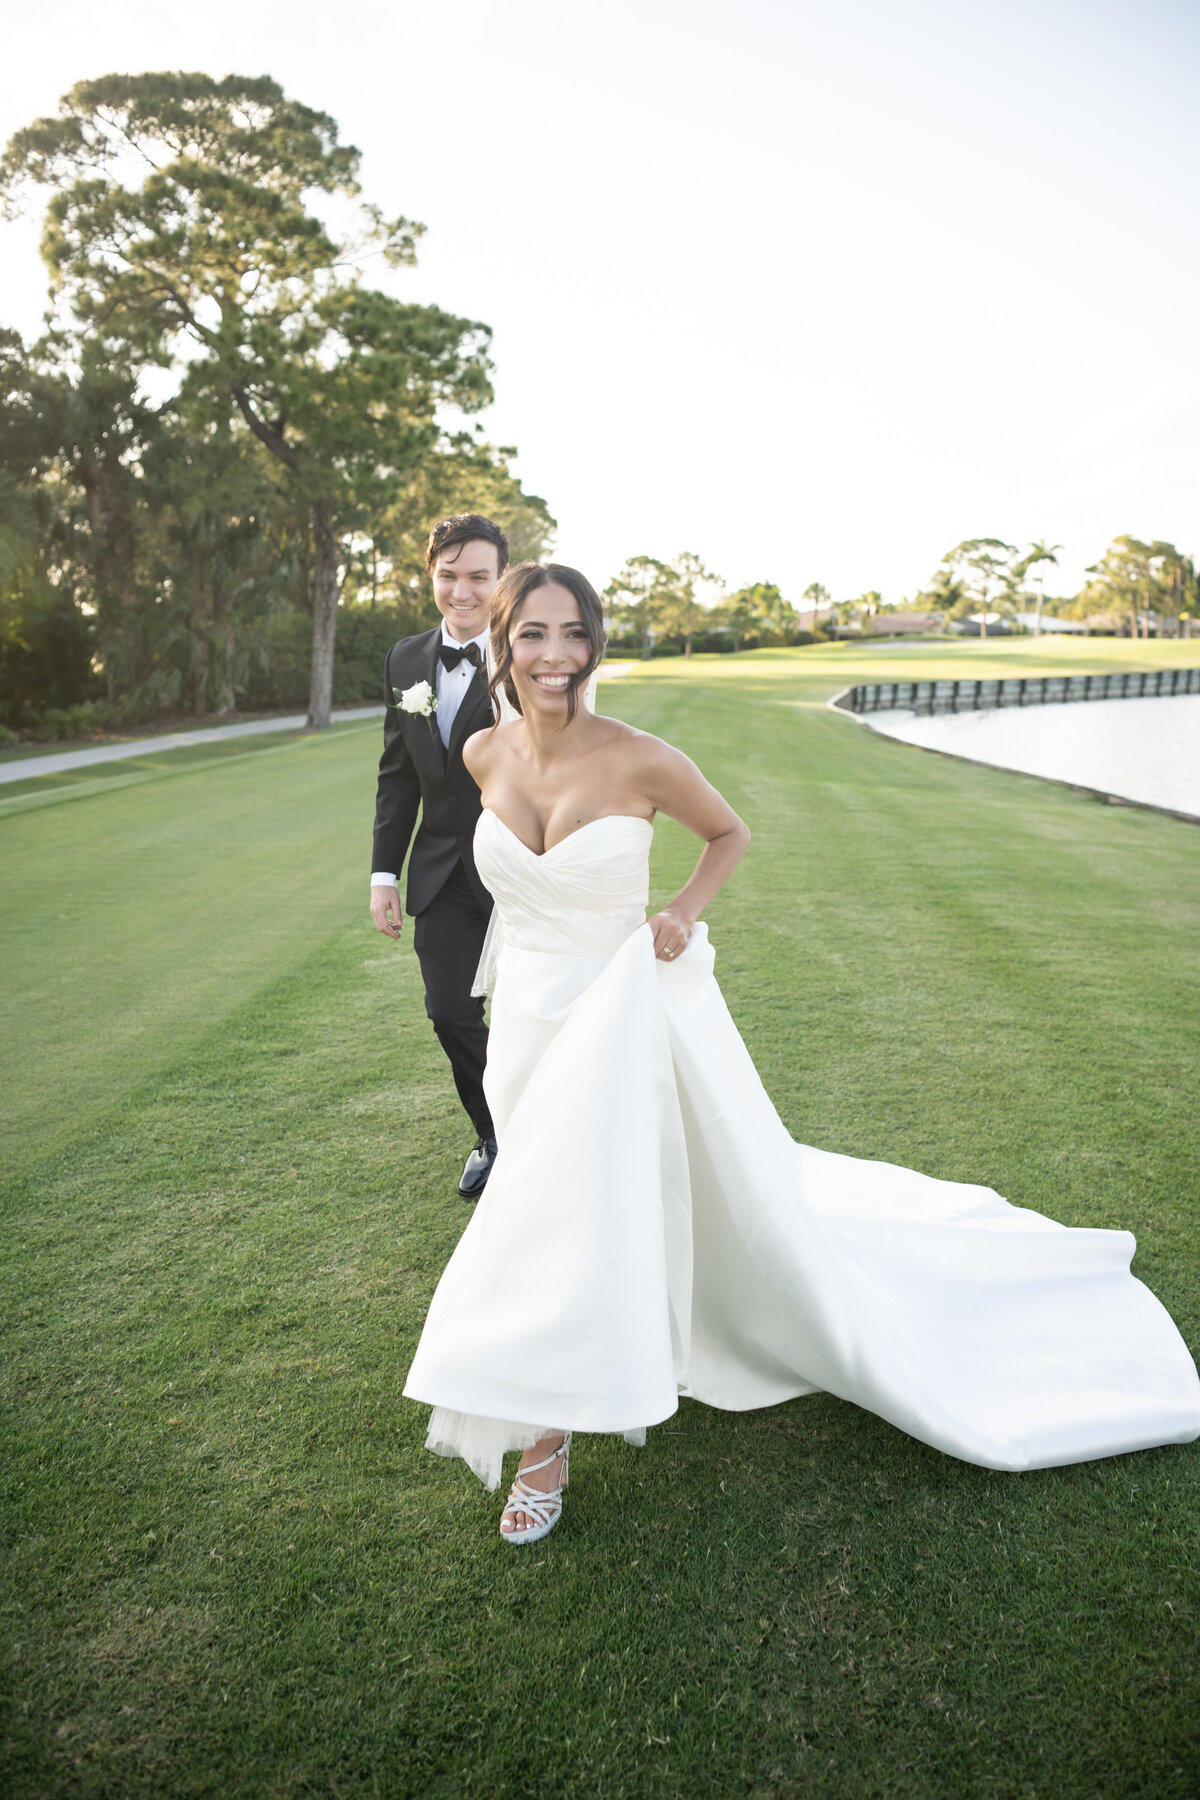 Bride and groom running on Ritz Carlton Golf course in Naples